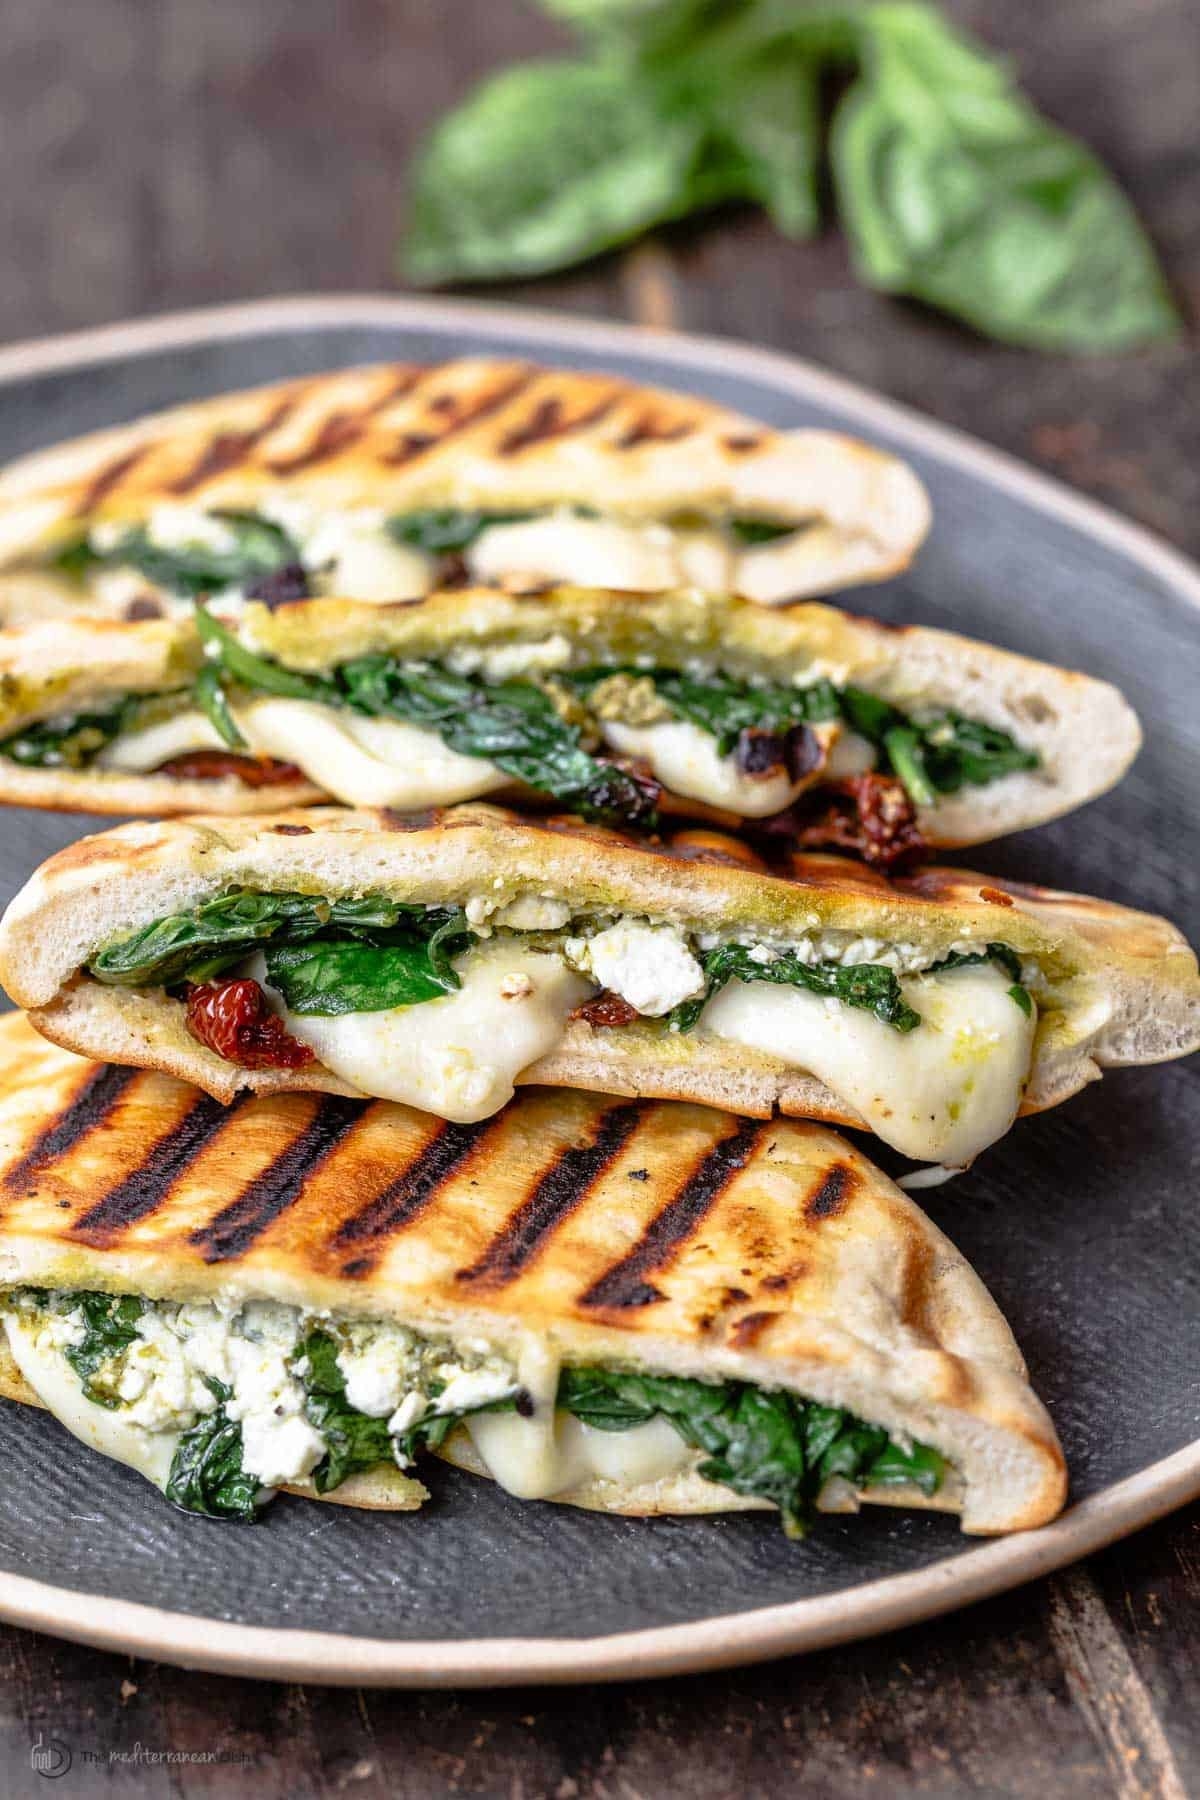 grilled pita bread with spinach, cheese and tomatoes inside